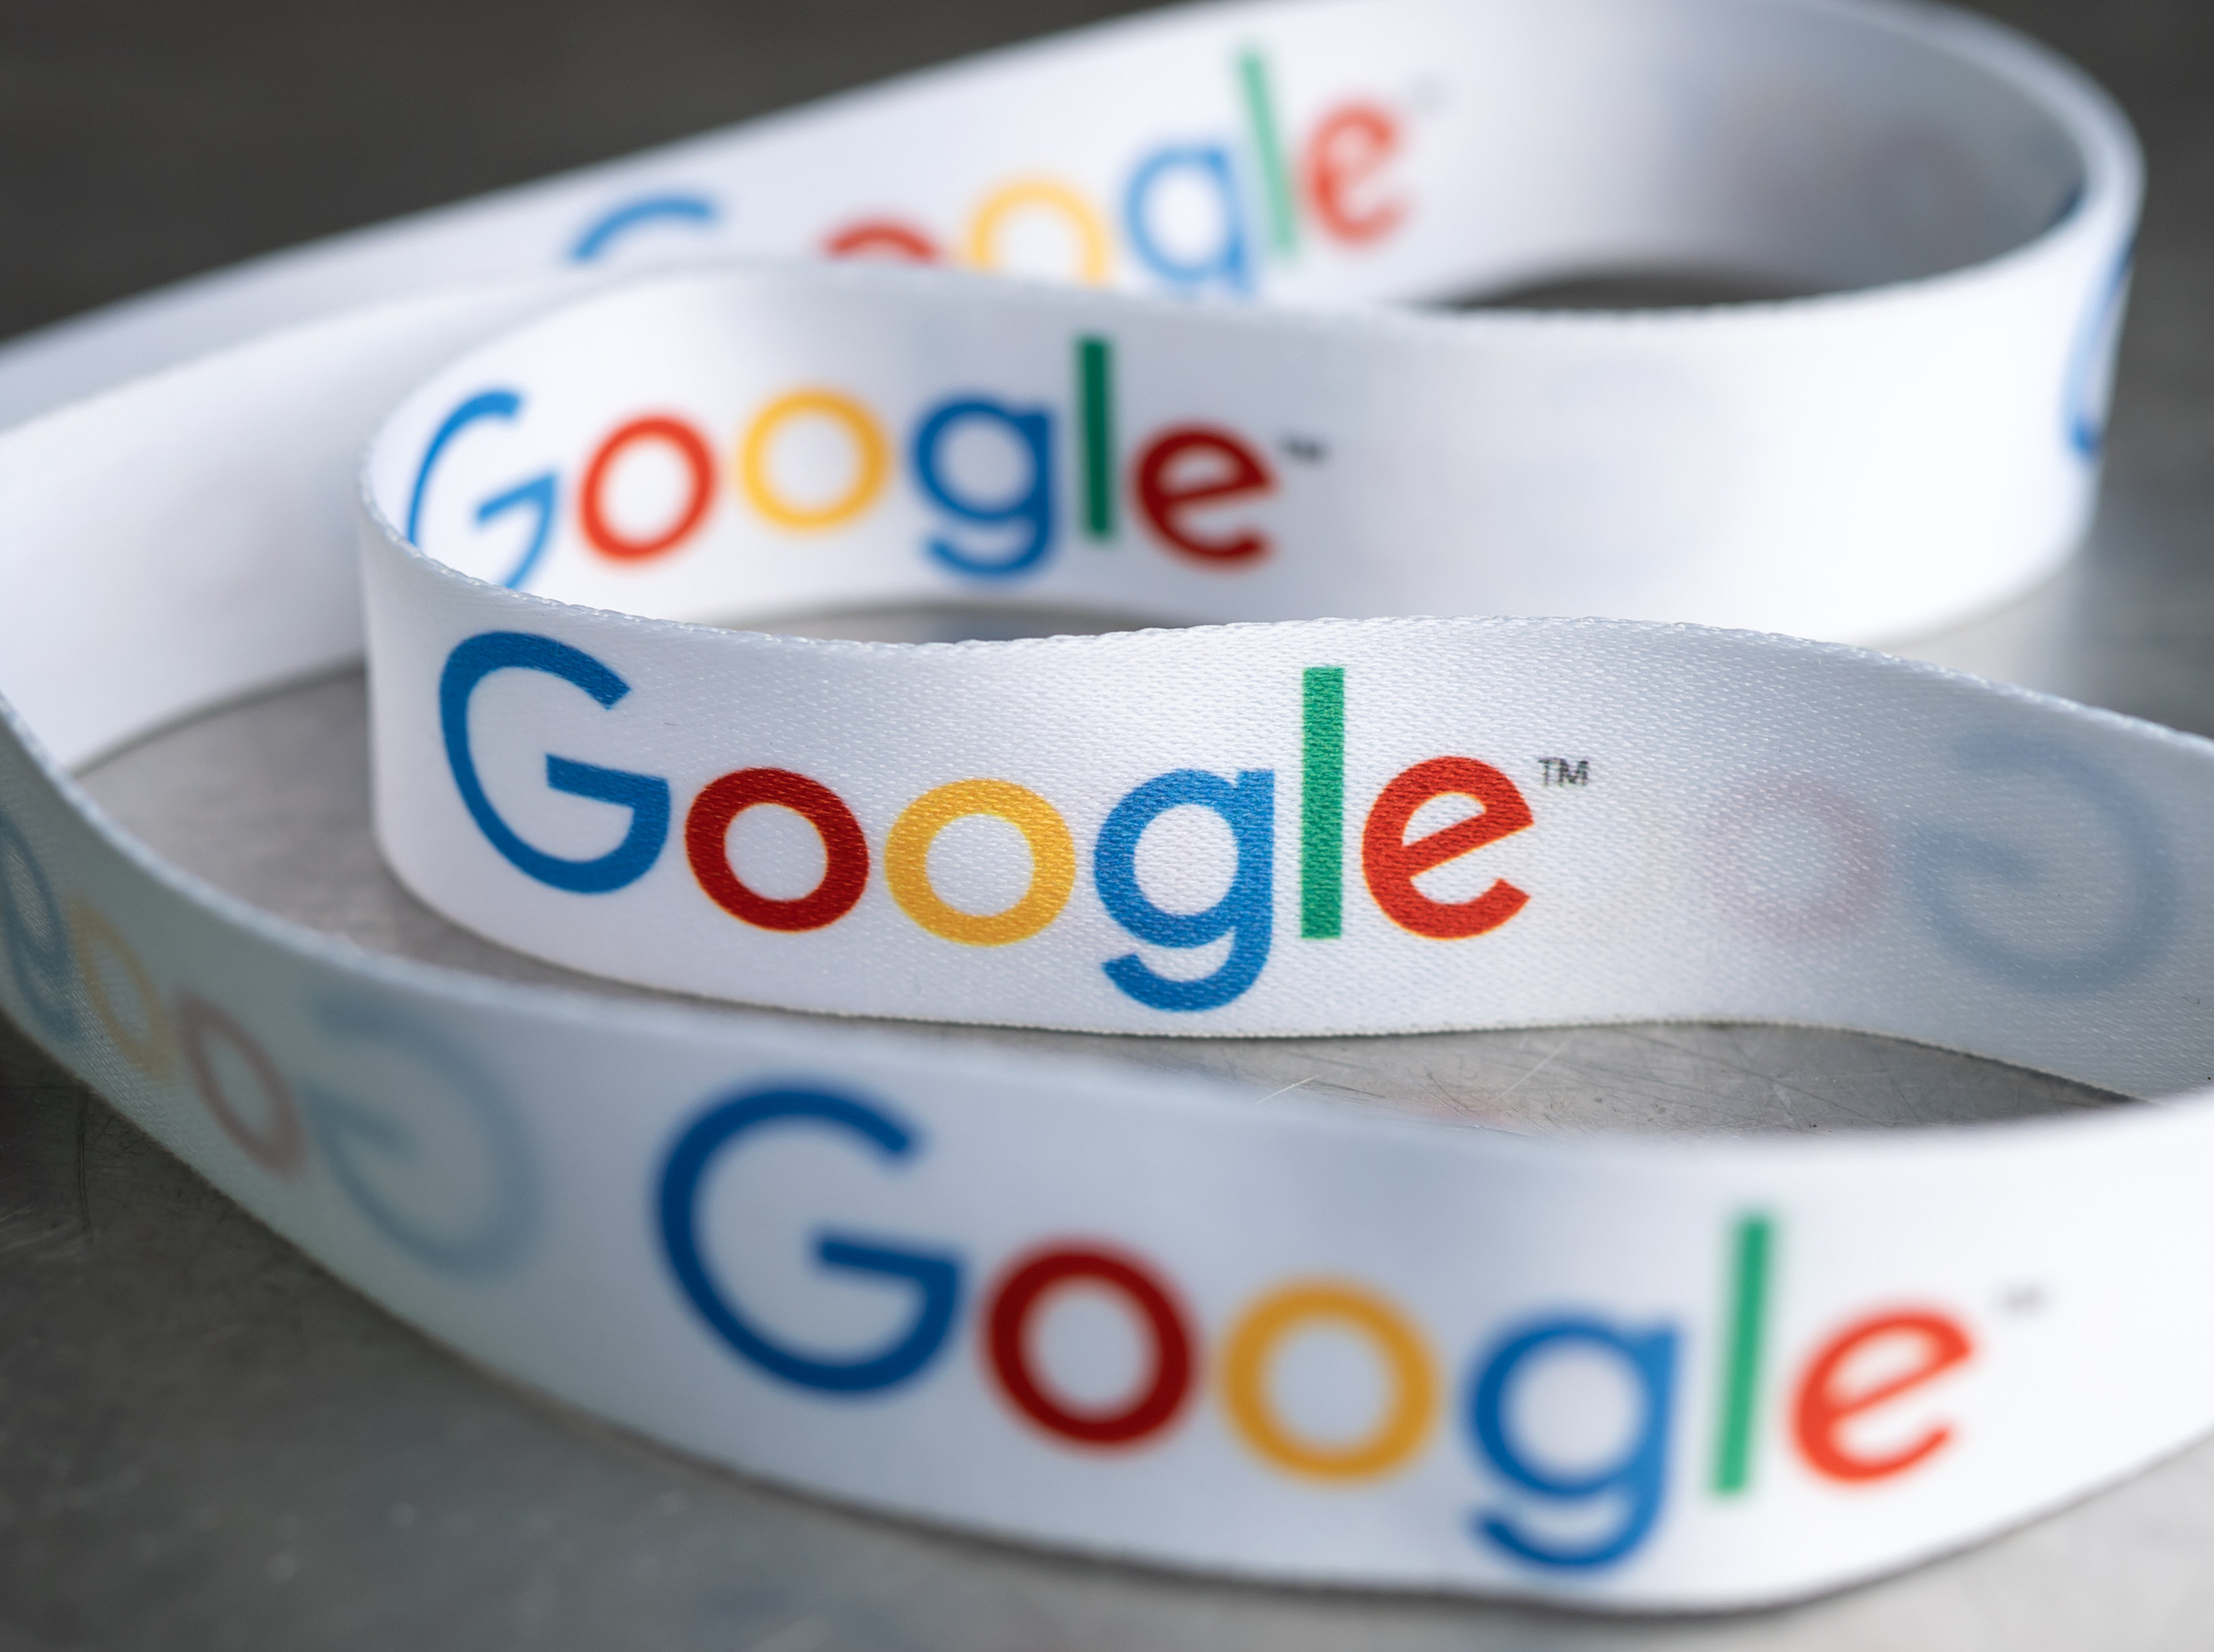 Malaysia is trying to attract as many technology companies as it can, including Alphabet Inc.’s Google, in its bid to become a major data hub and neutral supply chain base. Photo: dpa